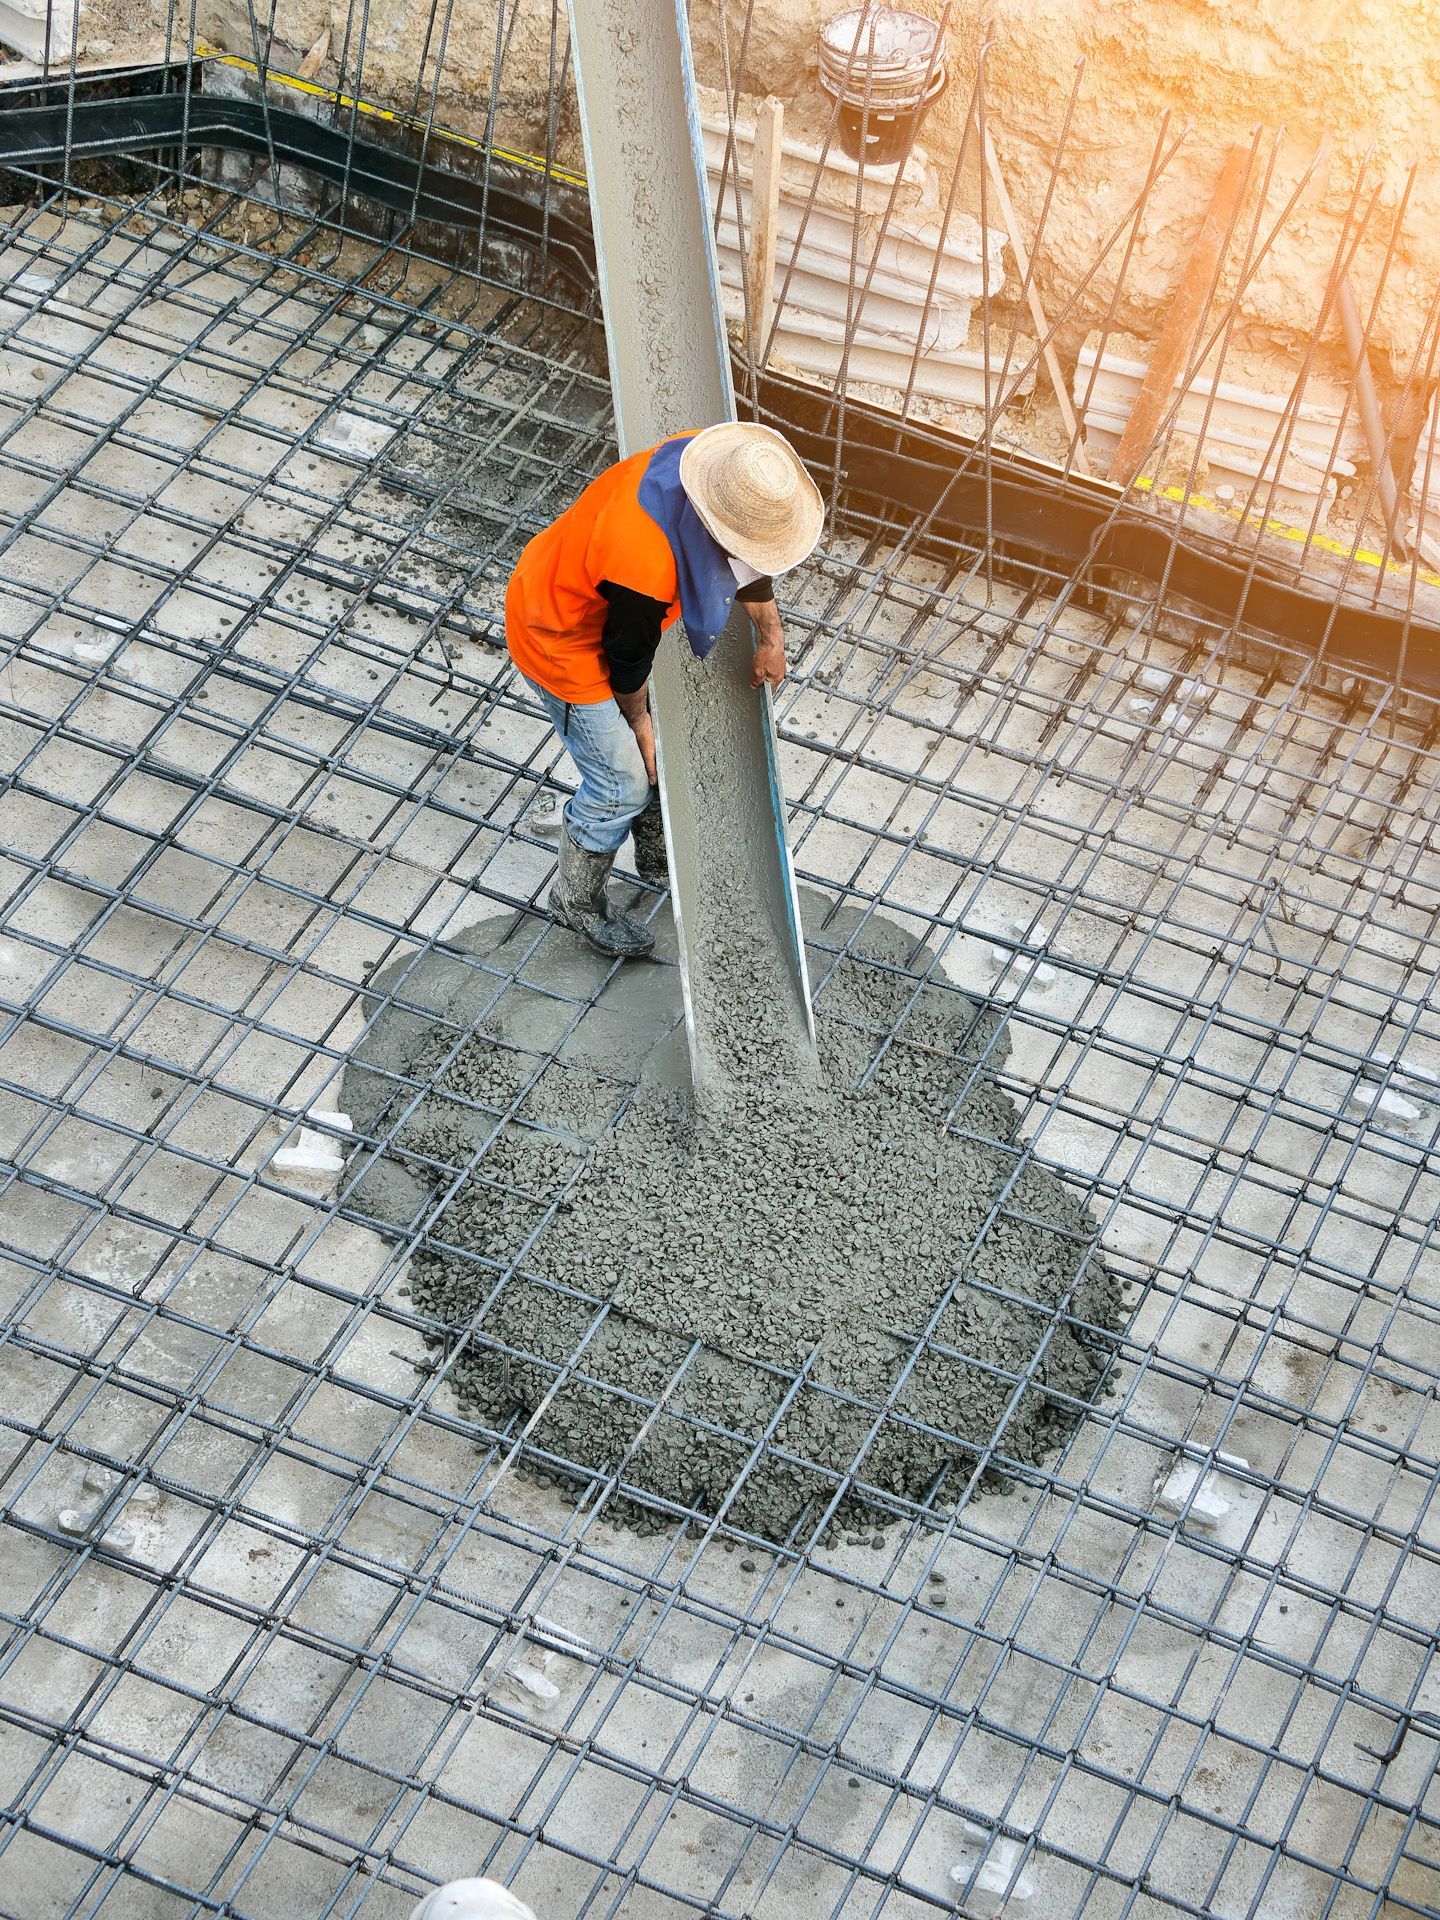 A construction worker is pouring concrete into a hole in the ground.